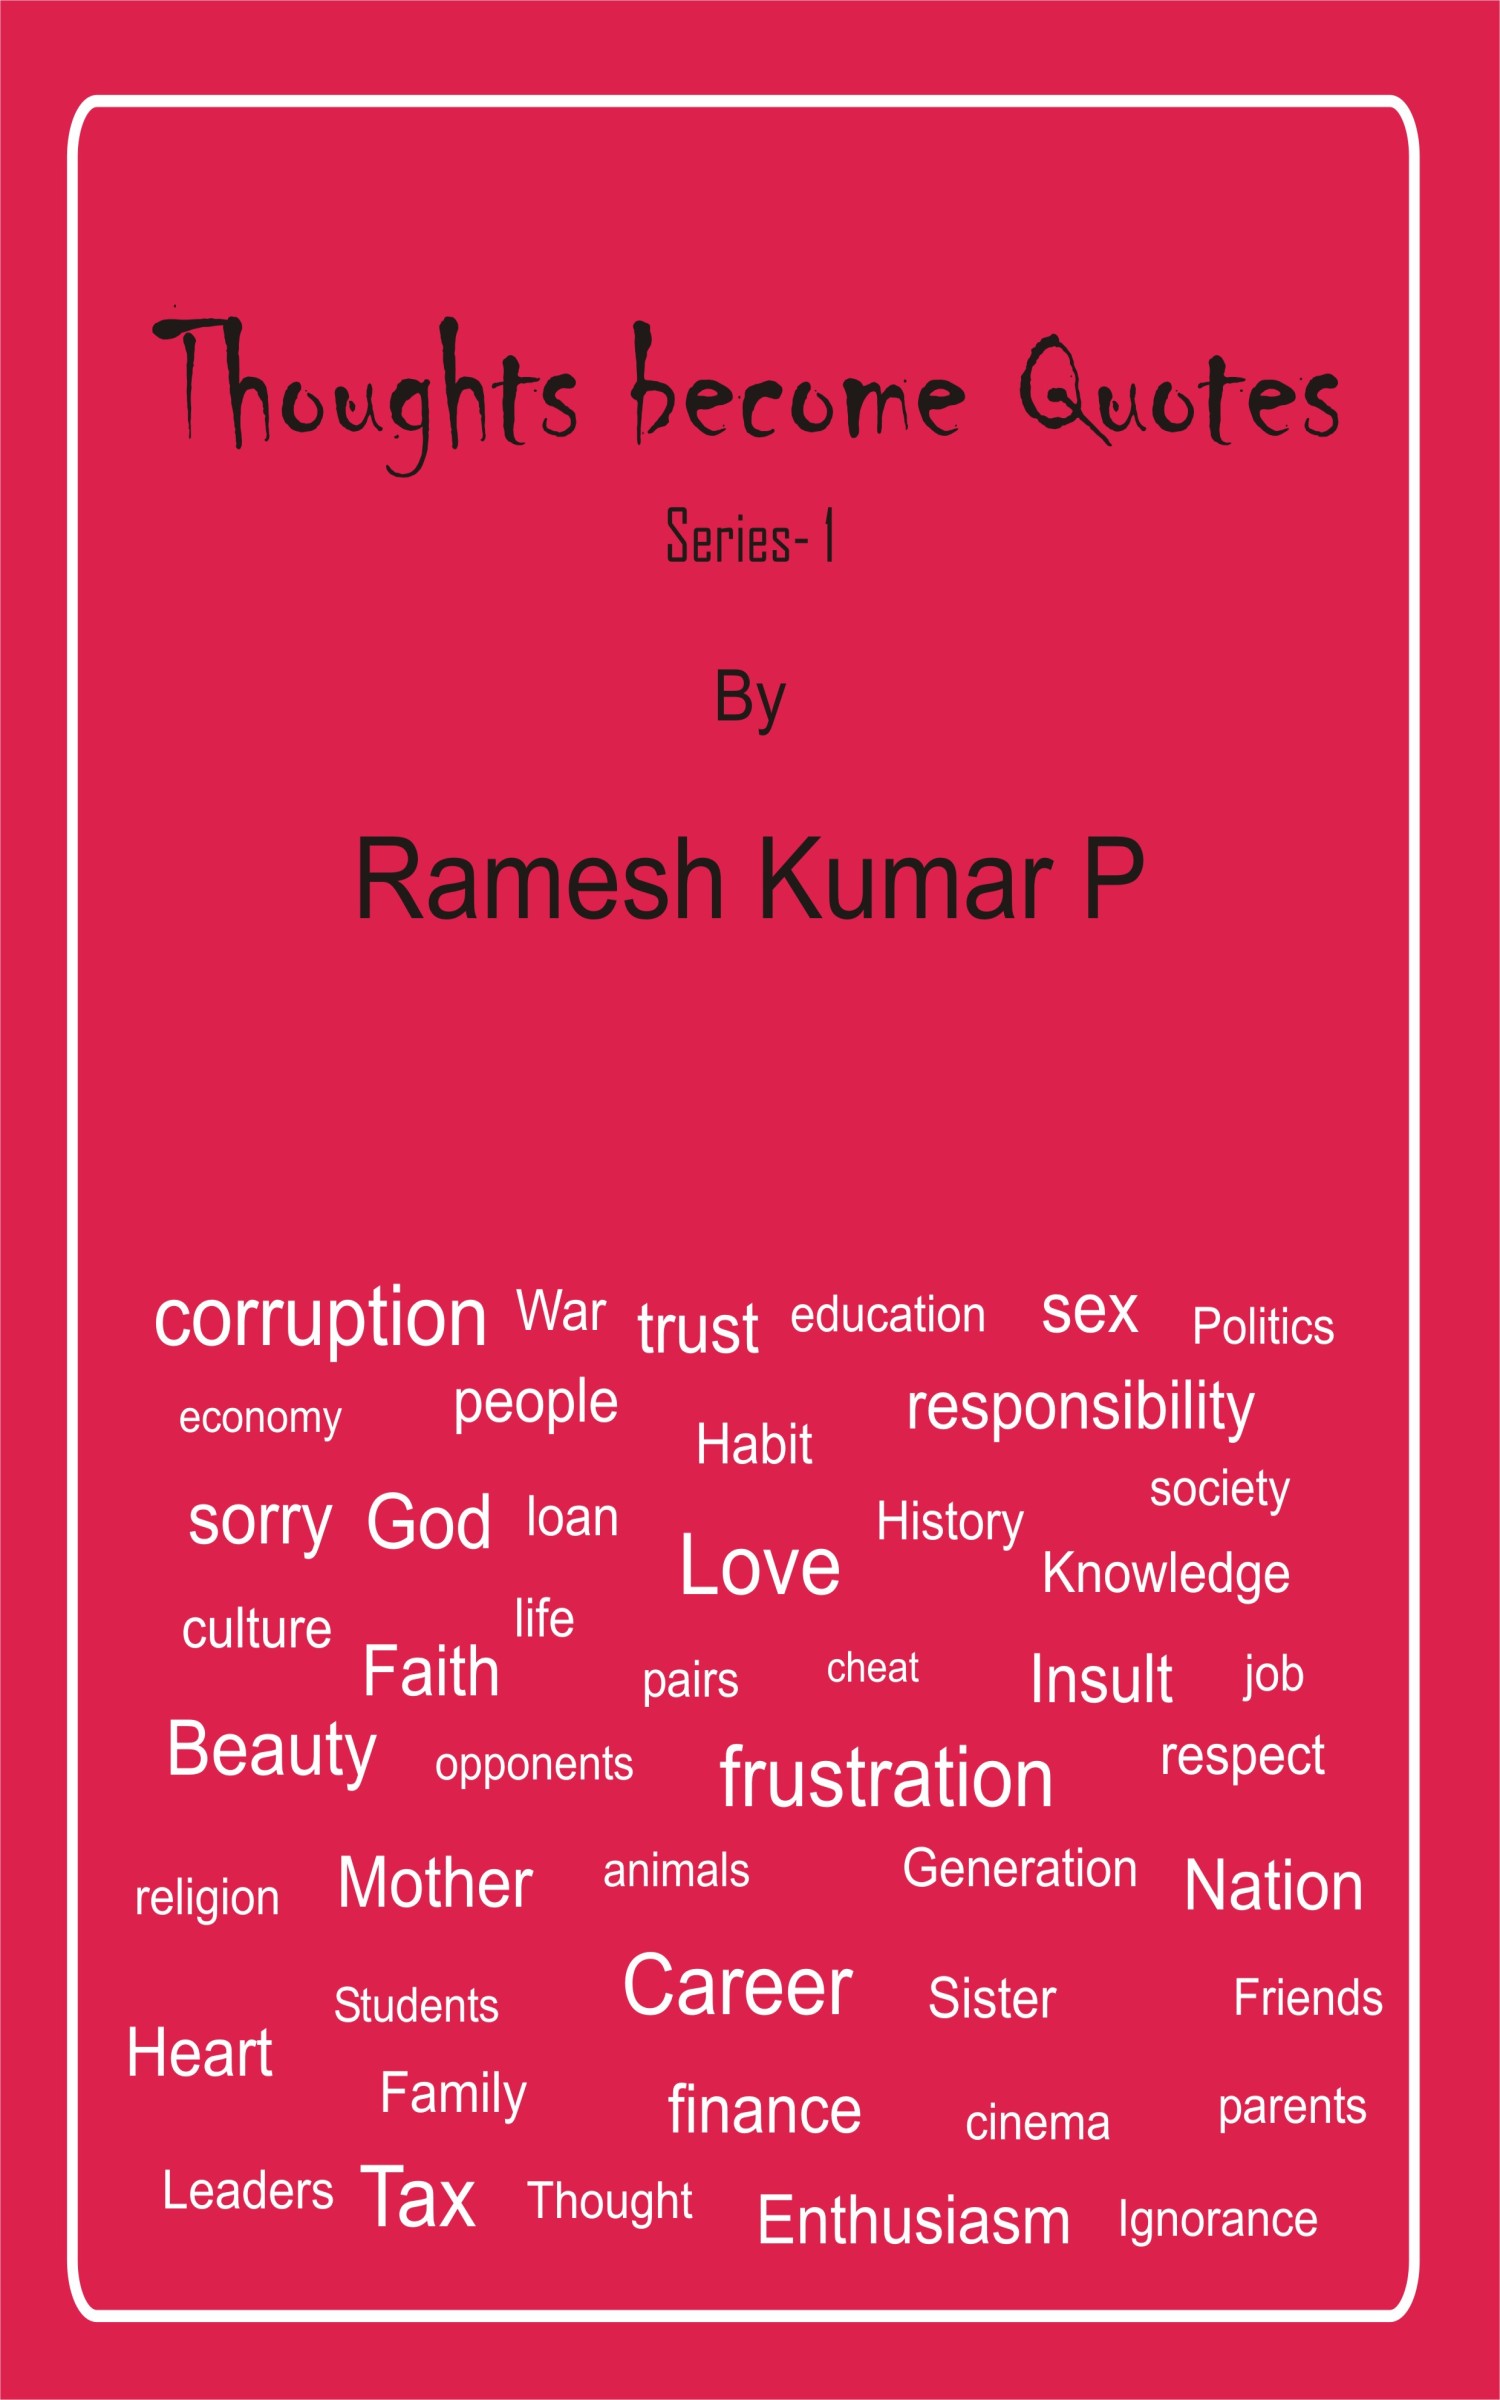 FREE: Thoughts become Quotes by Ramesh Kumar P